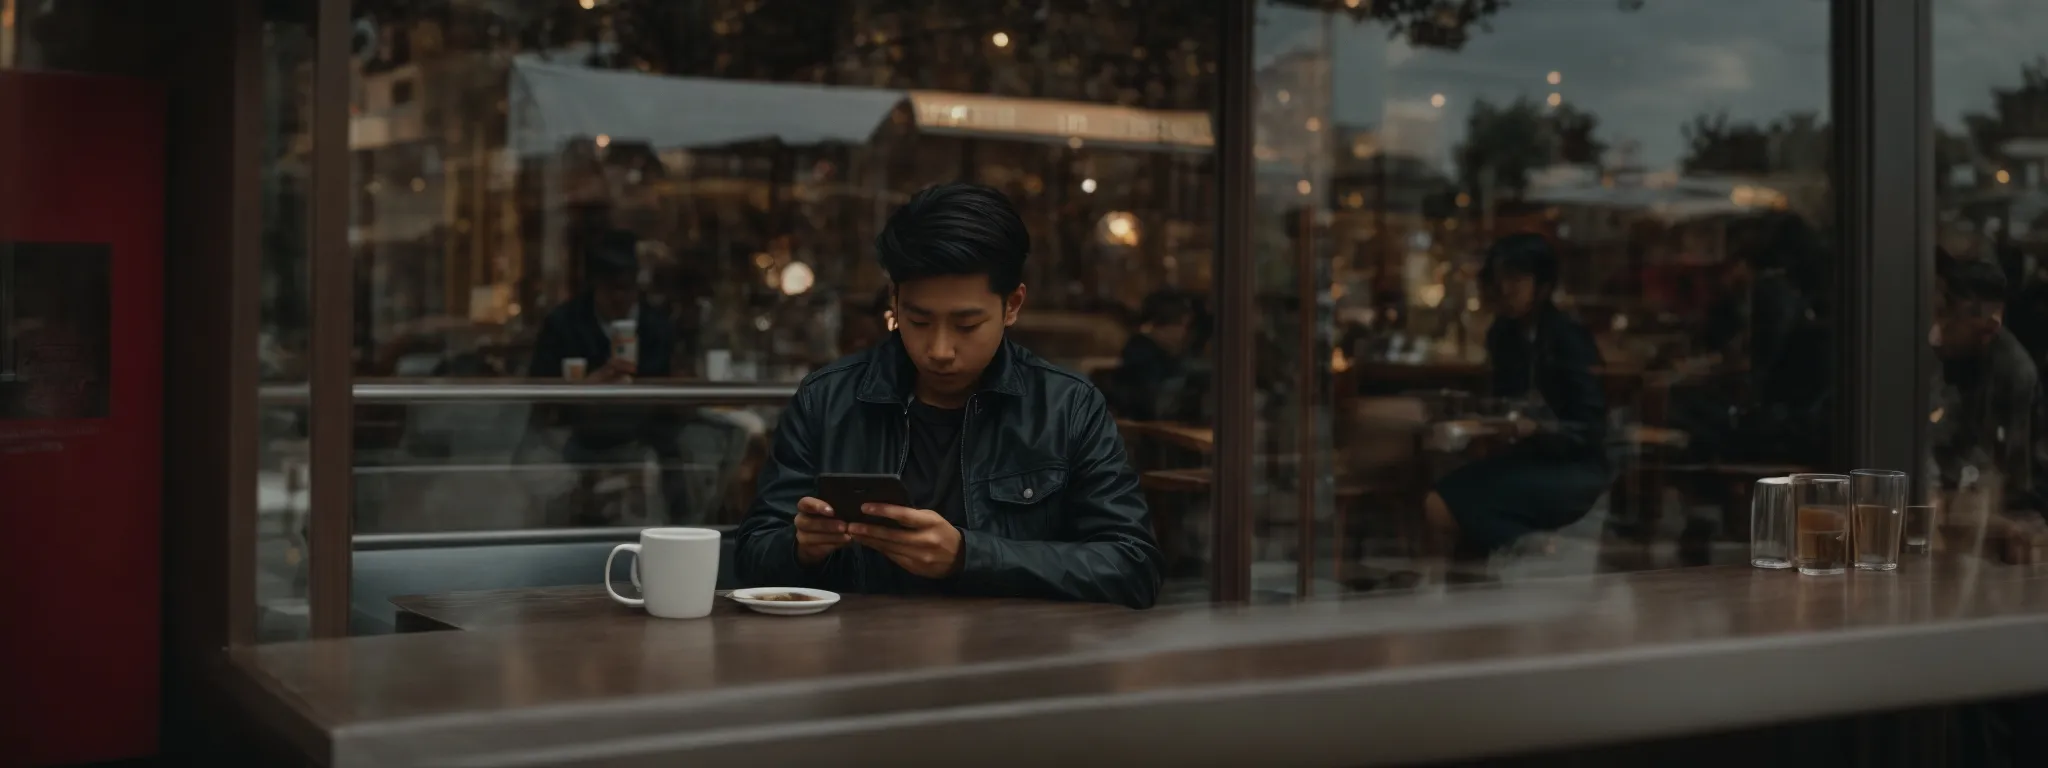 a person casually browsing on a smartphone while sitting at a cafe.